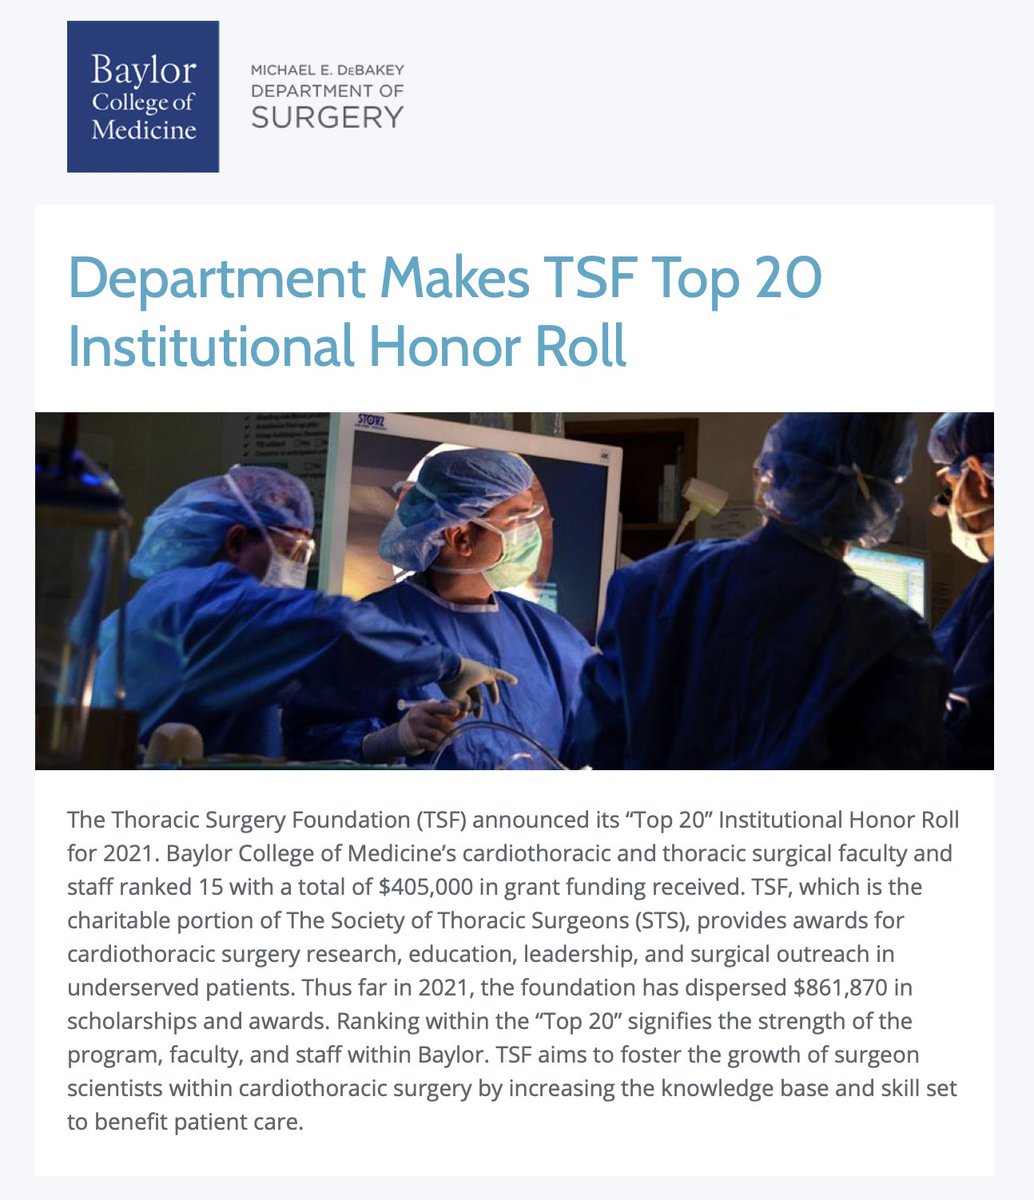 Congratulations! Baylor's cardiothoracic and thoracic surgical faculty and staff make the 'Top 20' Honor Roll. #DeBakeySurgeons

@BCM_Surgery @BCM_CTSurgery @STS_CTsurgery @CTSurgeryFdn